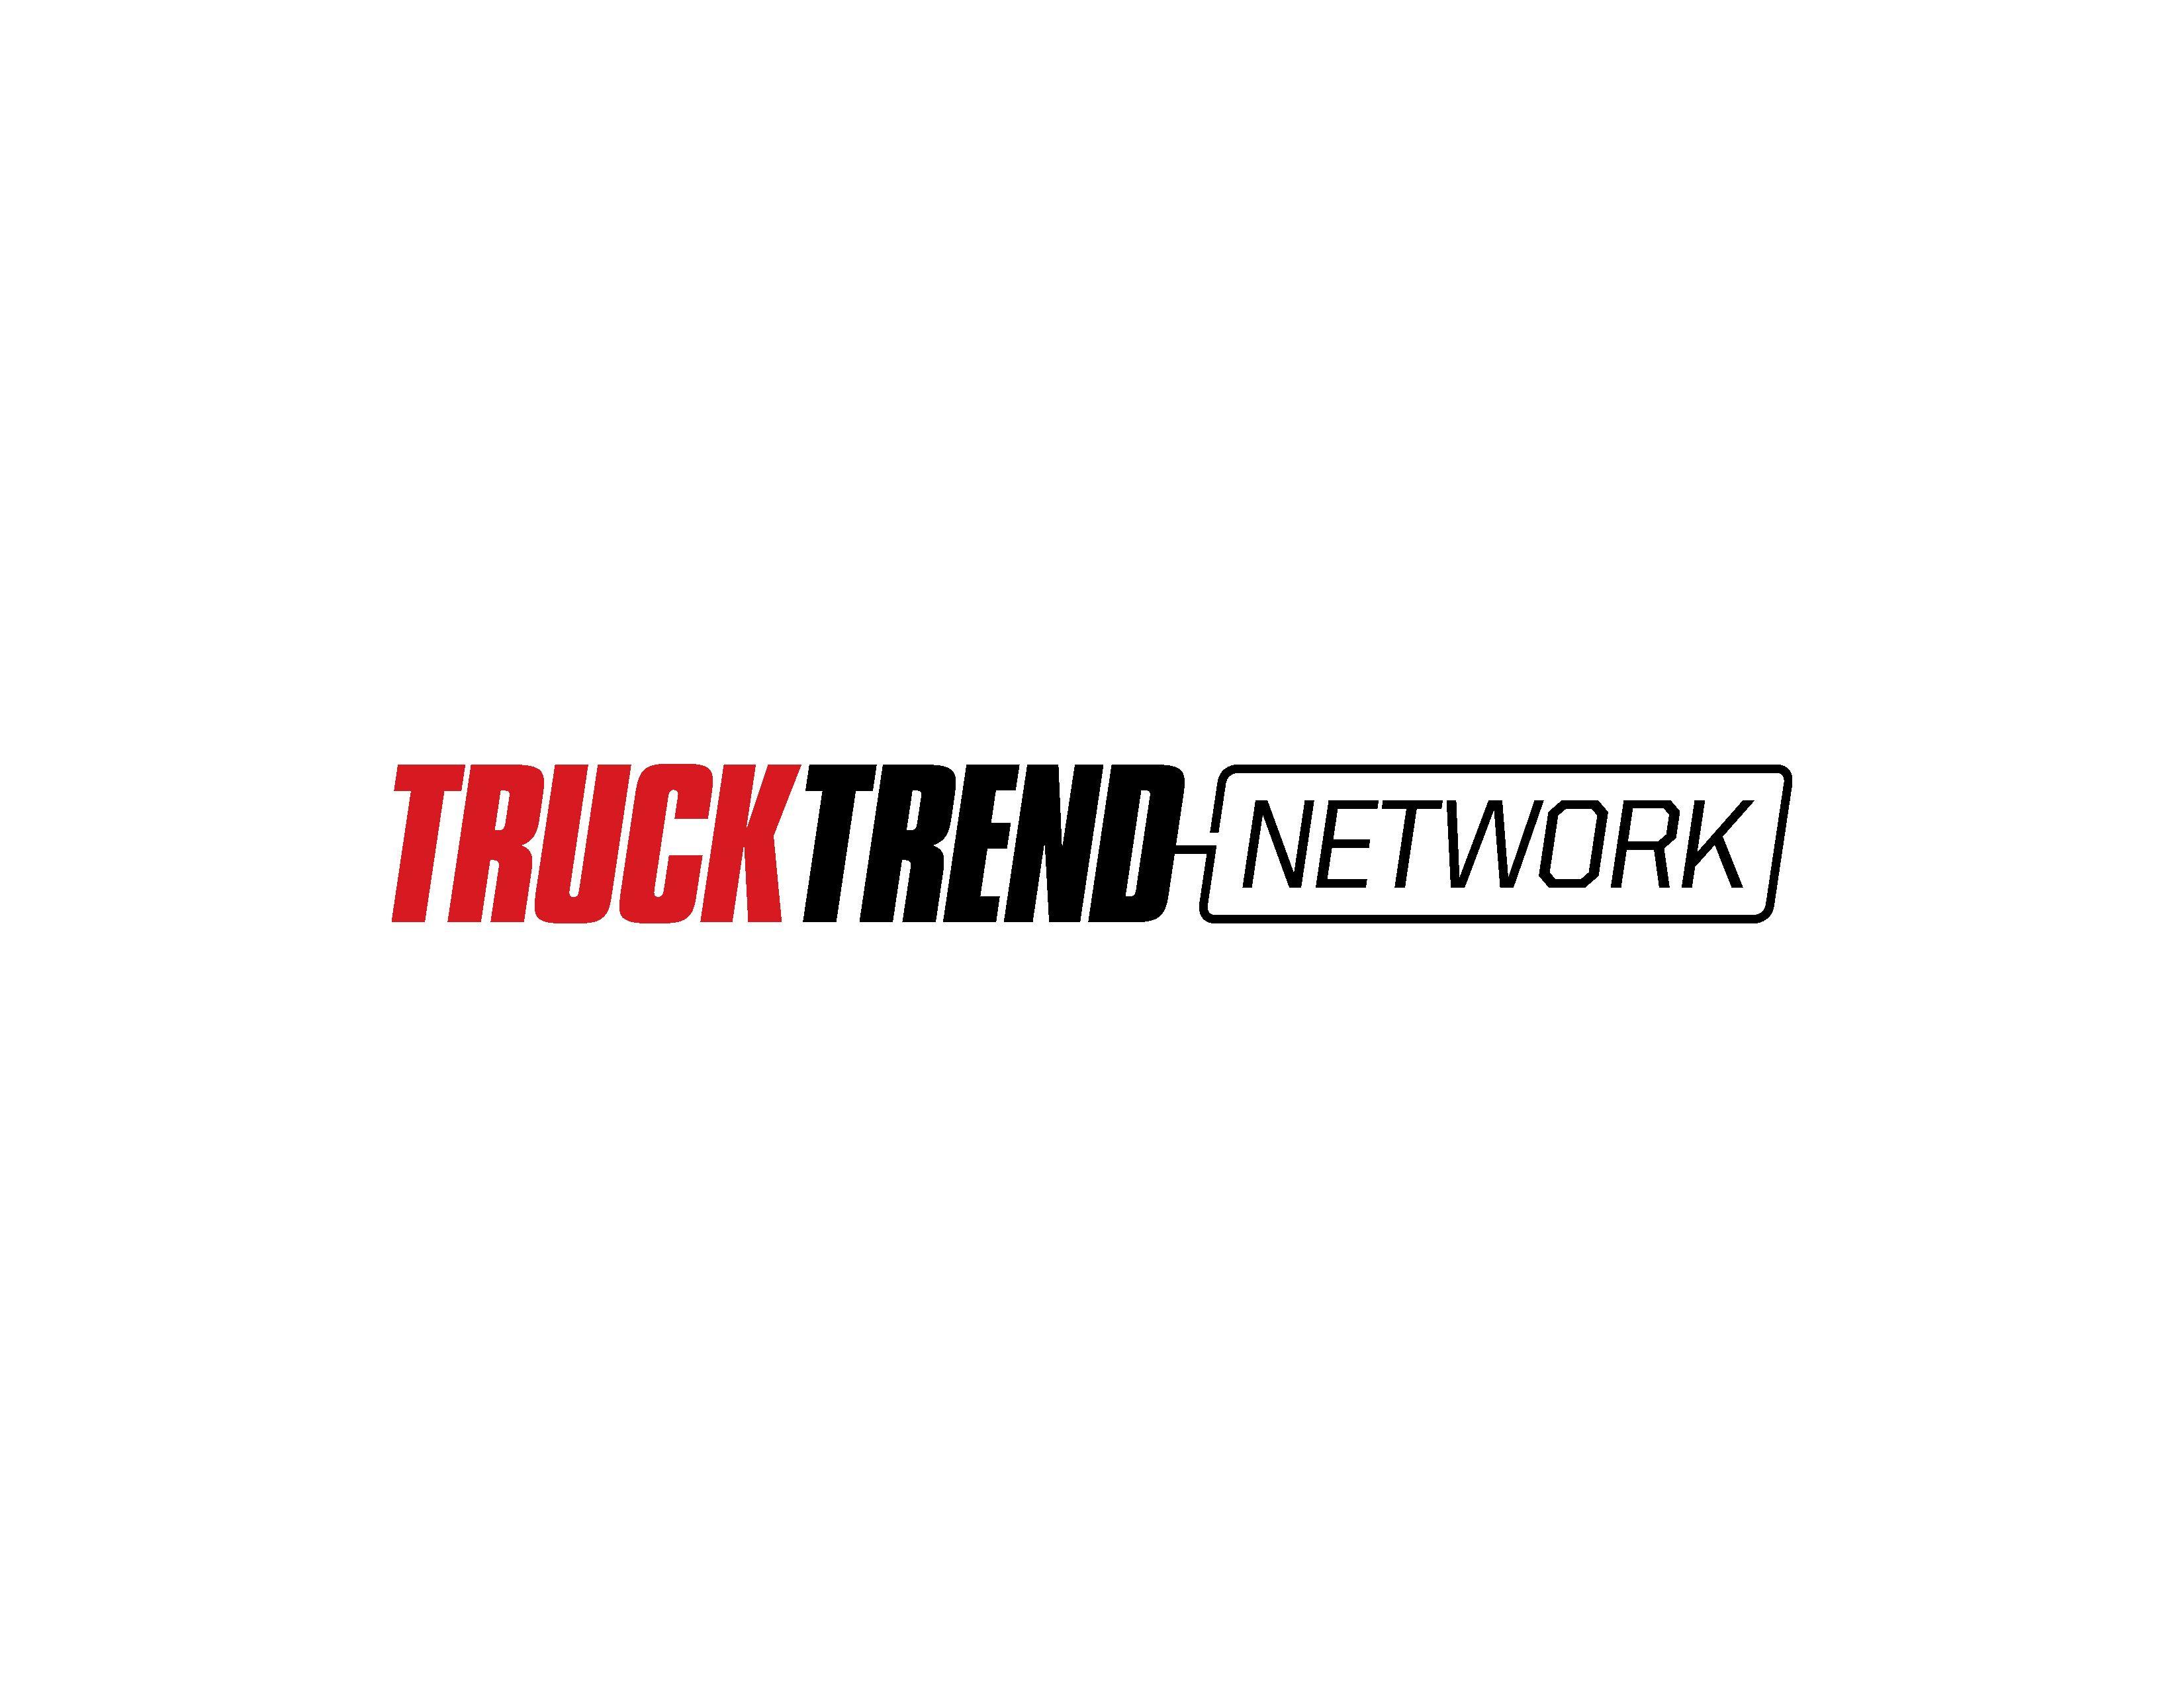 Motor Trend Logo - New Truck Trend Network Is Your One Stop Shop For All Things Truck